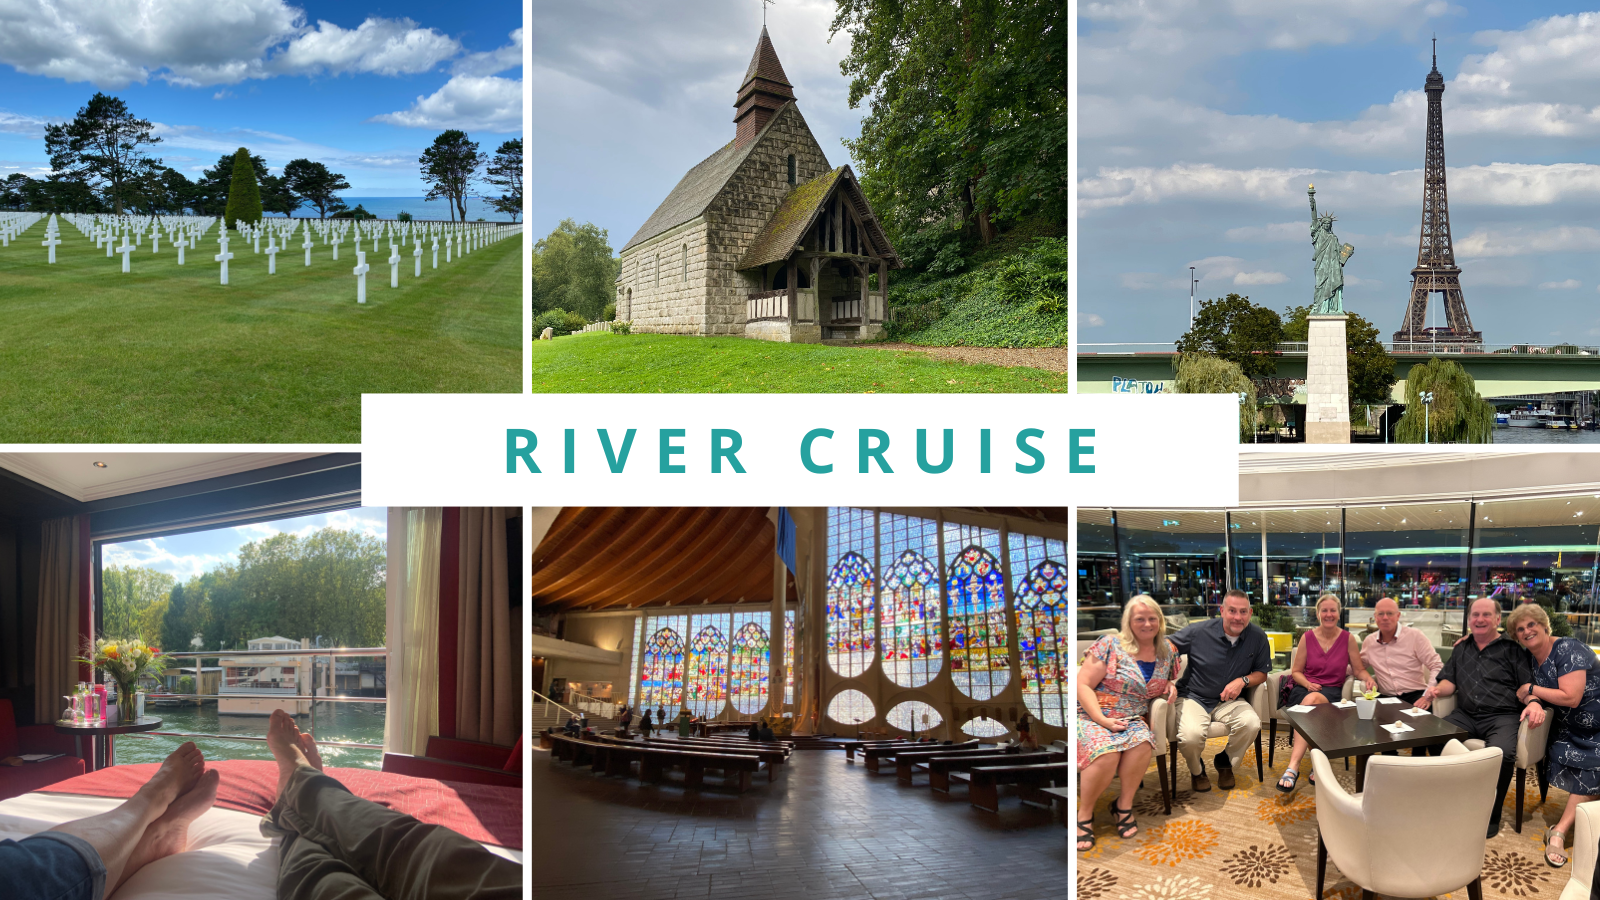 7 Things I Loved About Our River Cruise Vacation